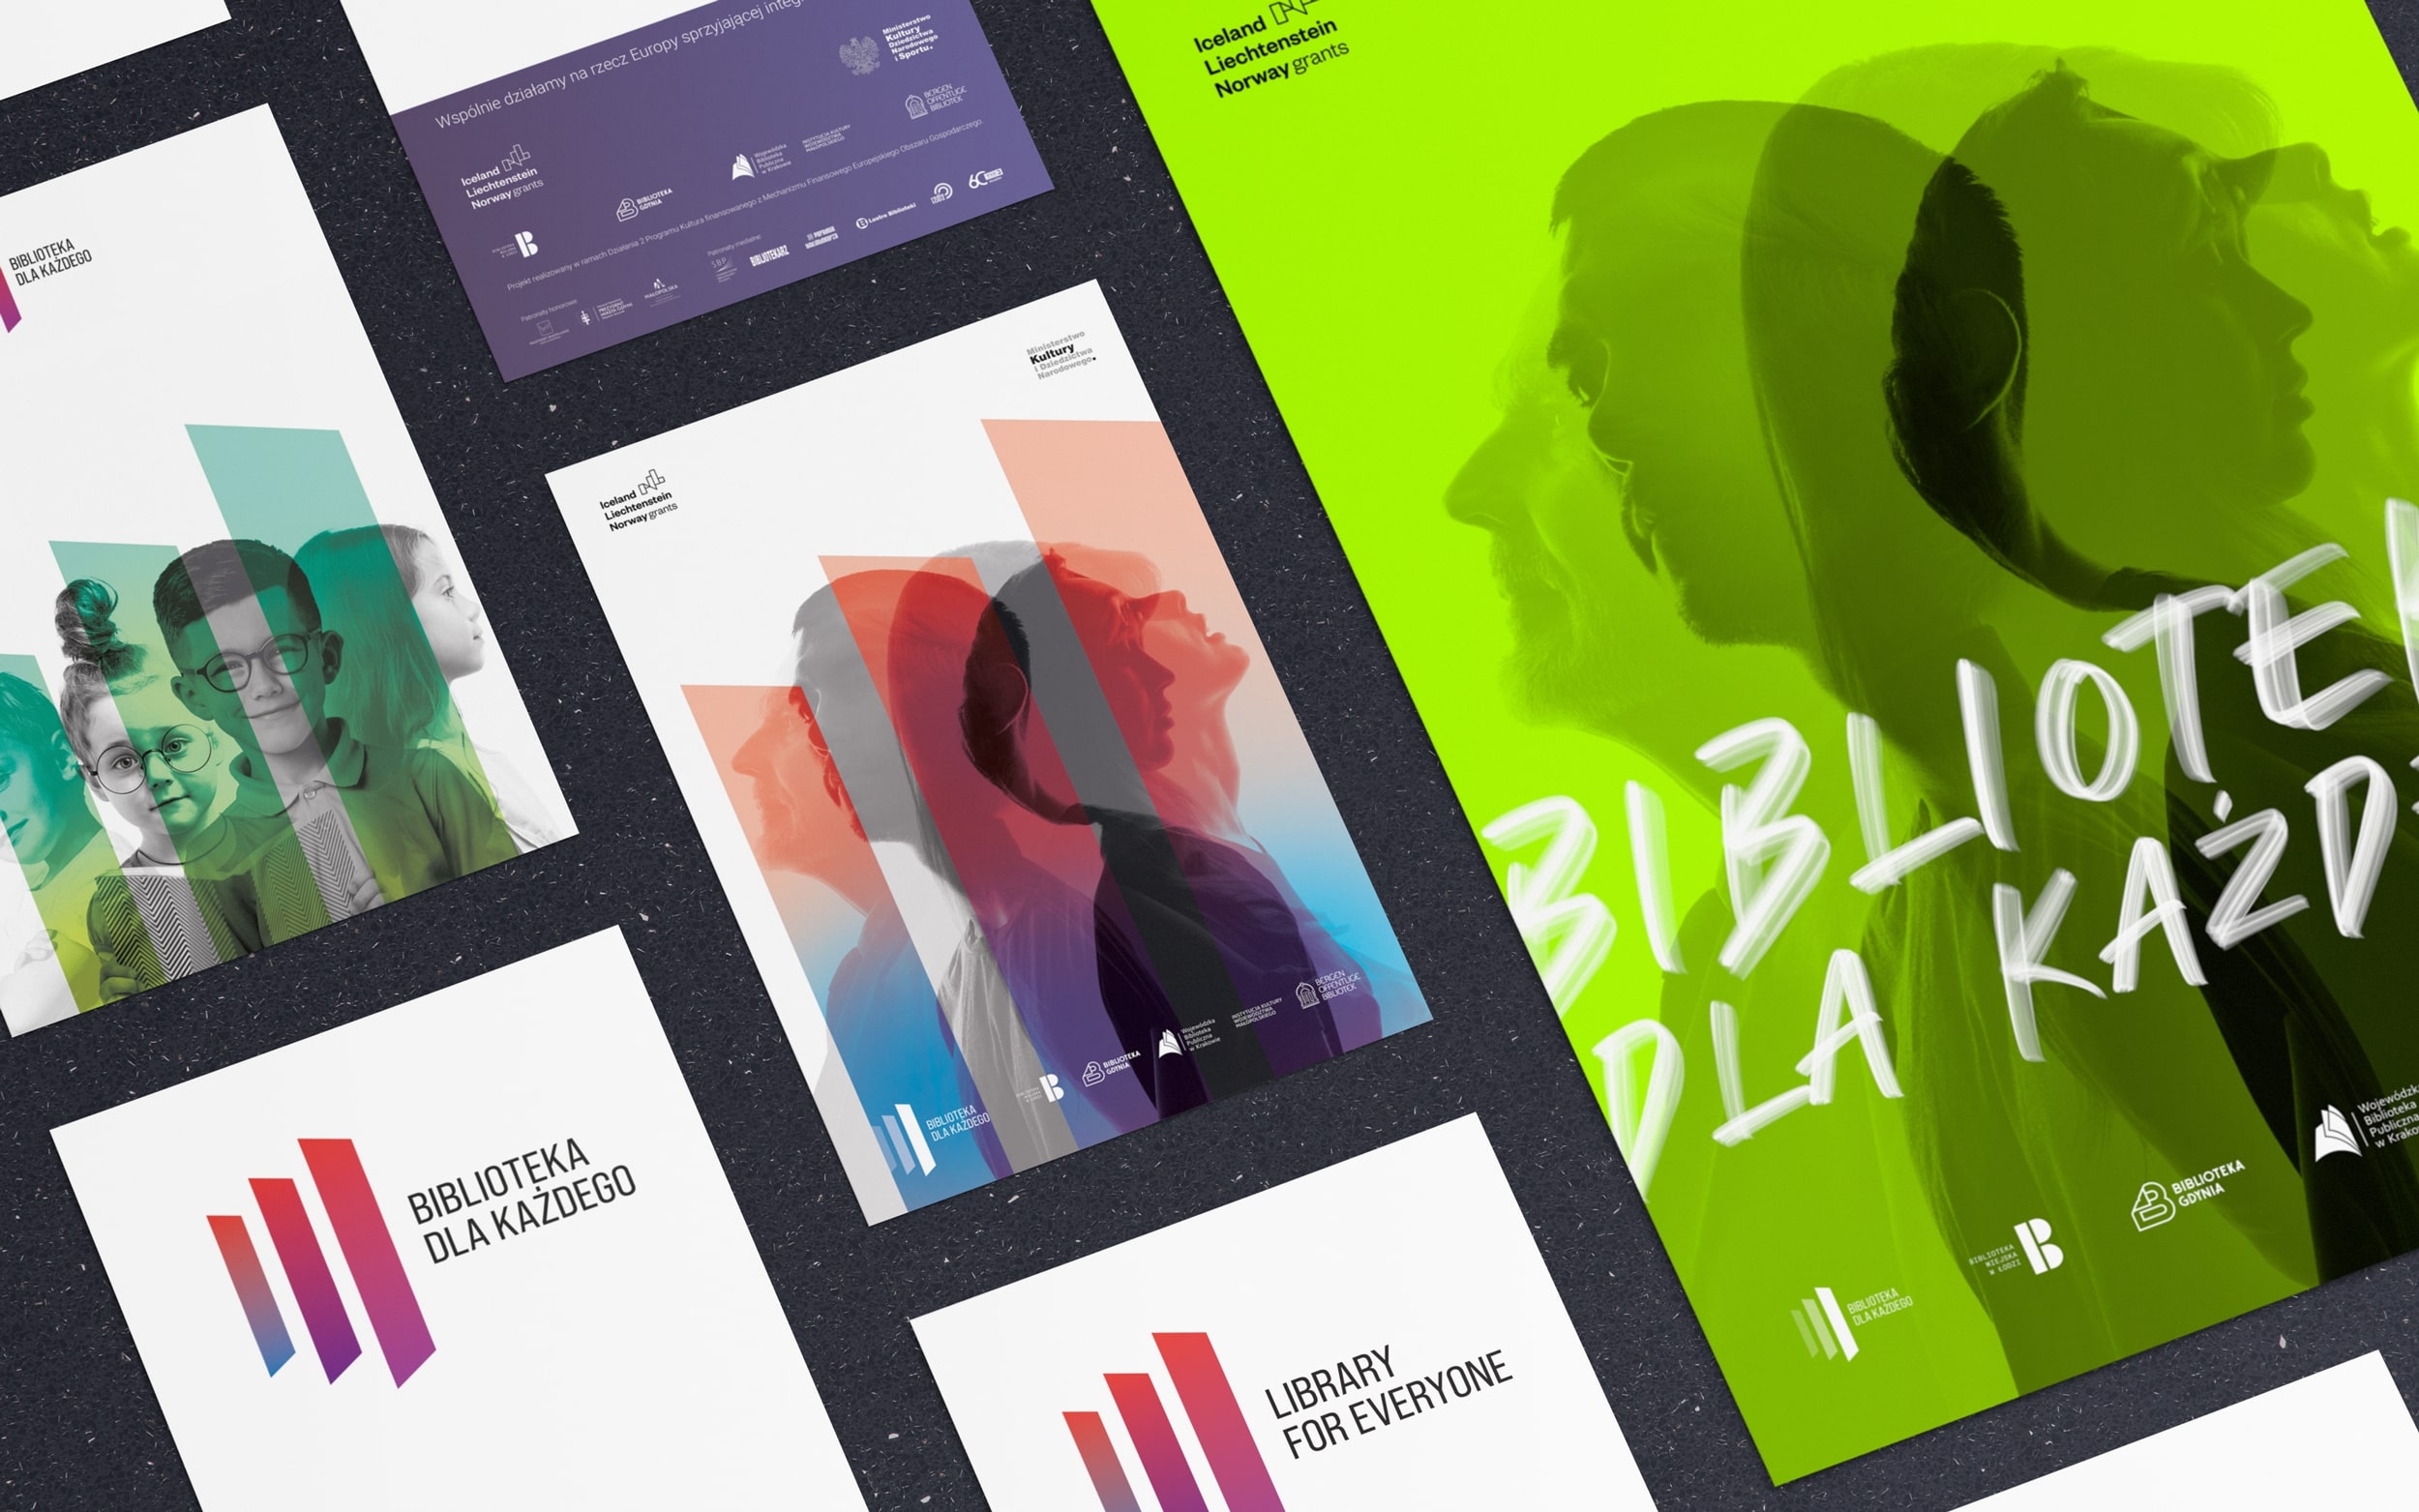 Creative Flow Create Gdynia Metropolitan Public Library Branding and Promotion